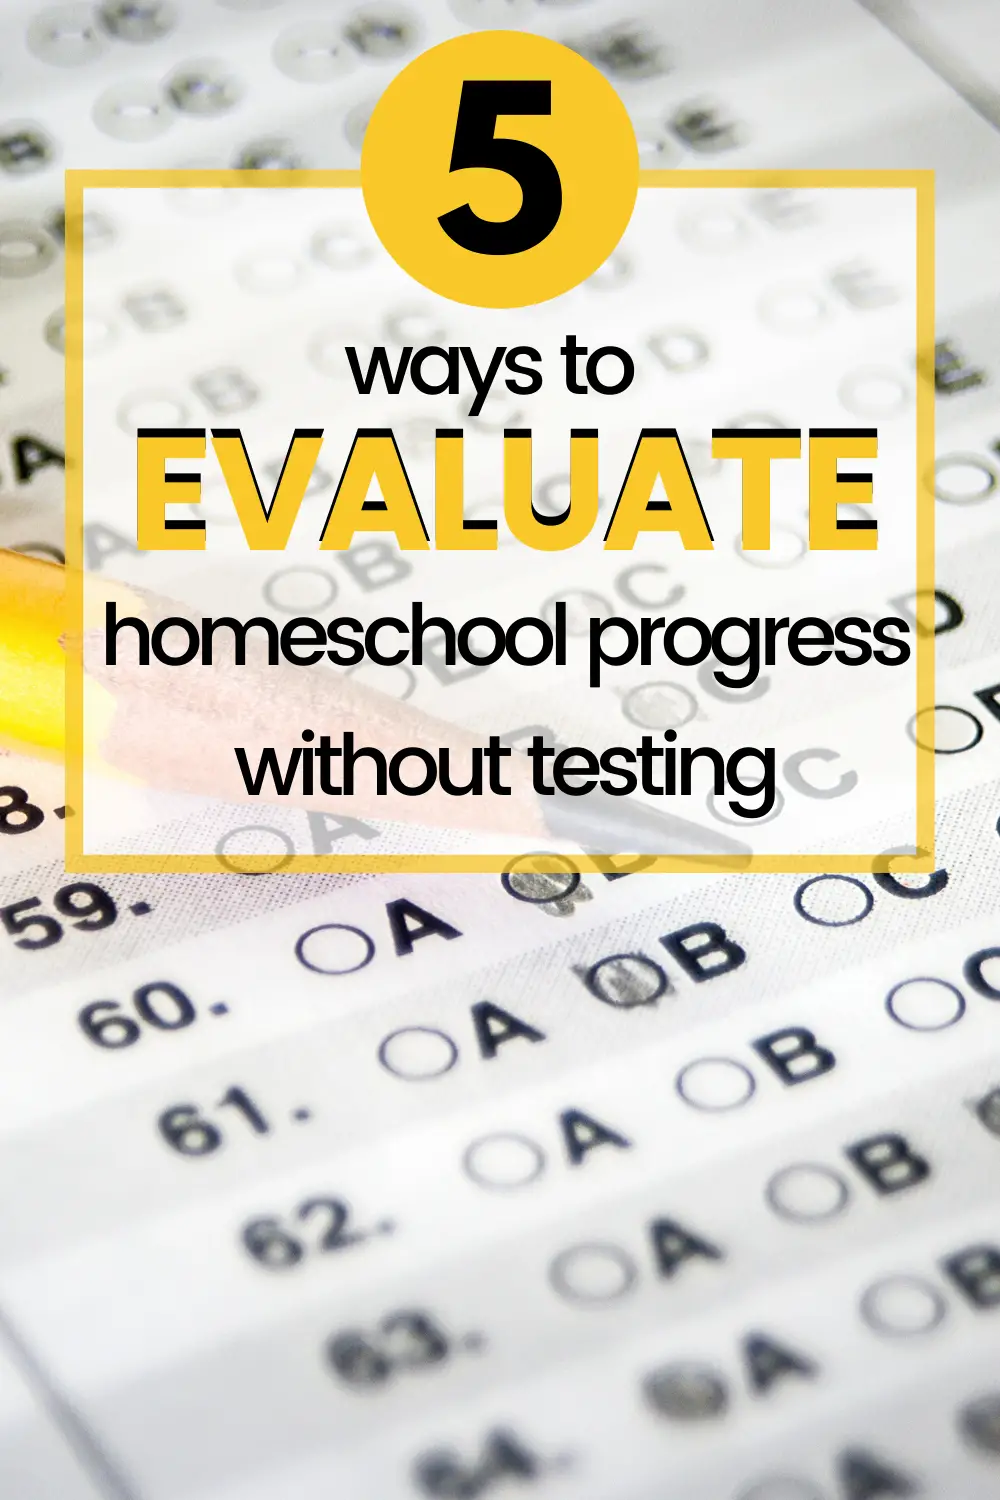 Discover how to evaluate progress in your homeschool without relying solely on end-of-unit and standardized tests. Let's get creative!